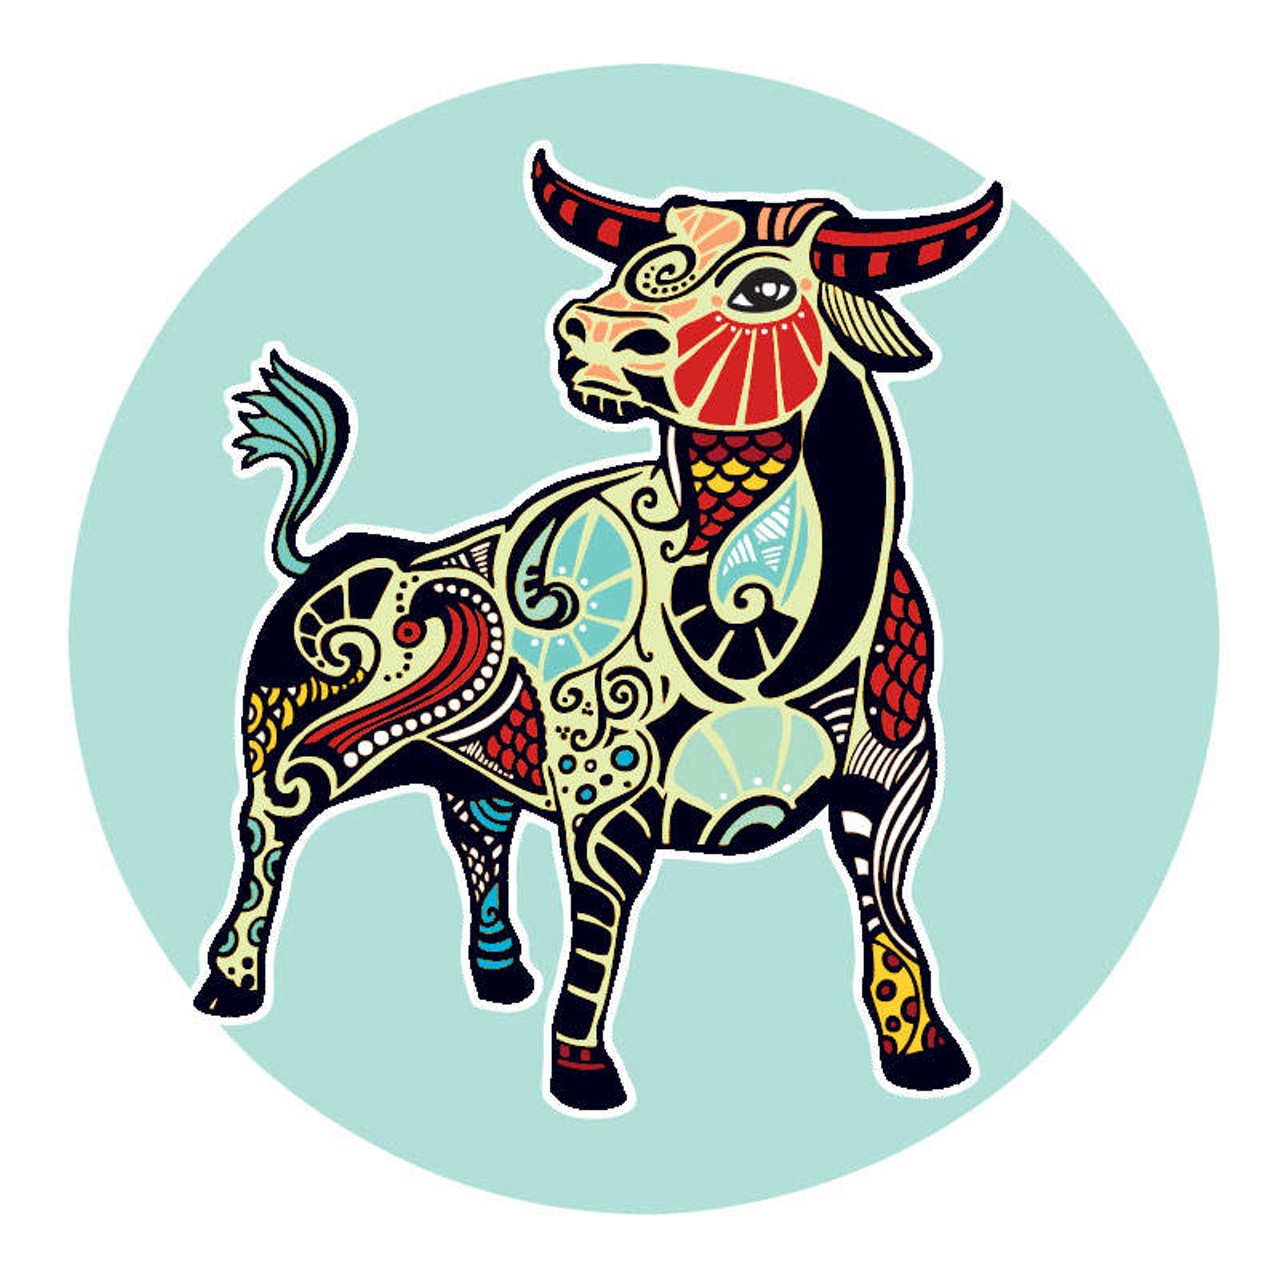 TAURUS (April 21 -May 20): Once you come to terms with the fact that you can&#146;t keep this up, it&#146;ll be easier to rearrange things. Do your best and see what comes of it. What&#146;s going on right now is making you wonder if everything you&#146;ve been told bears any whiff of truth. So much has flown out the window, you&#146;re looking at the need to get real. Reassessing the situation, it comes down to realizing that all the money in the world isn&#146;t going to change this. Another force needs to come to life before you can re-group and be strong enough to continue, and before close others will show their true colors.